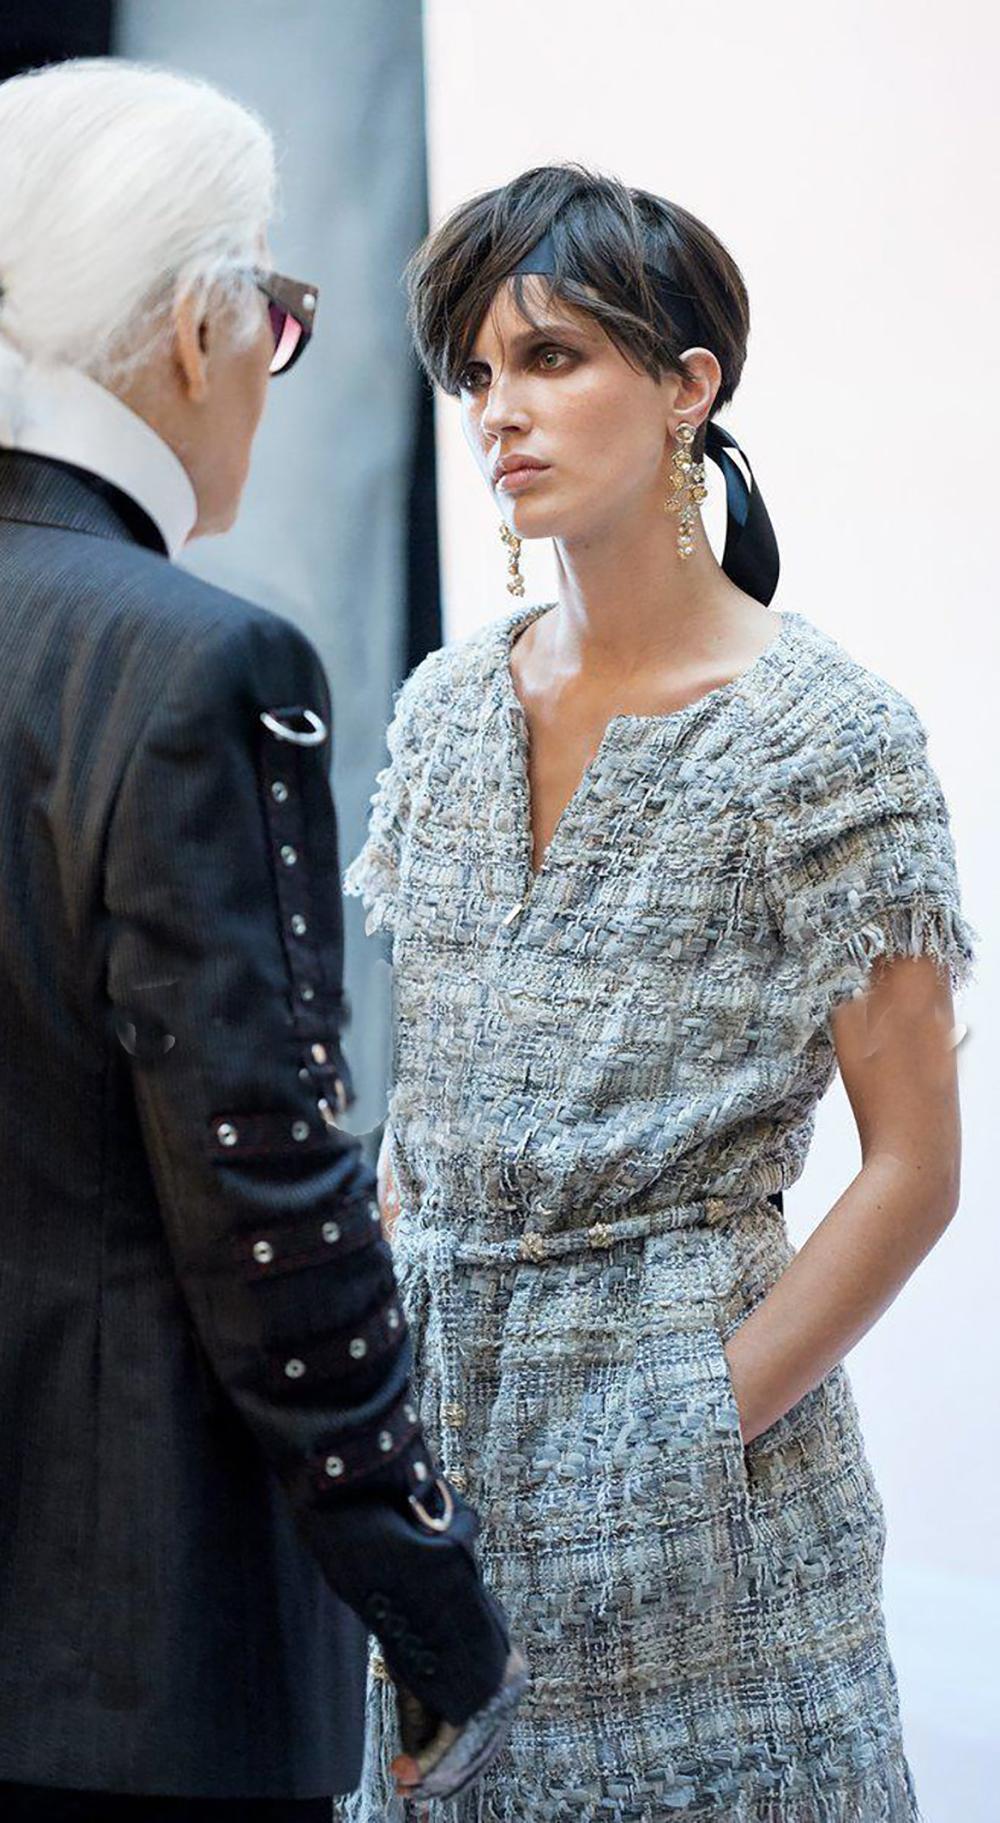 Fabulous Chanel ribbon tweed dress from Paris / GREECE 2018 Cruise Collection, 18C
As seen in Ad Campaign on Supermodel Victoria Ceretti!
- CC jewel belt at waist
Size mark 34 FR. Condition is pristine.